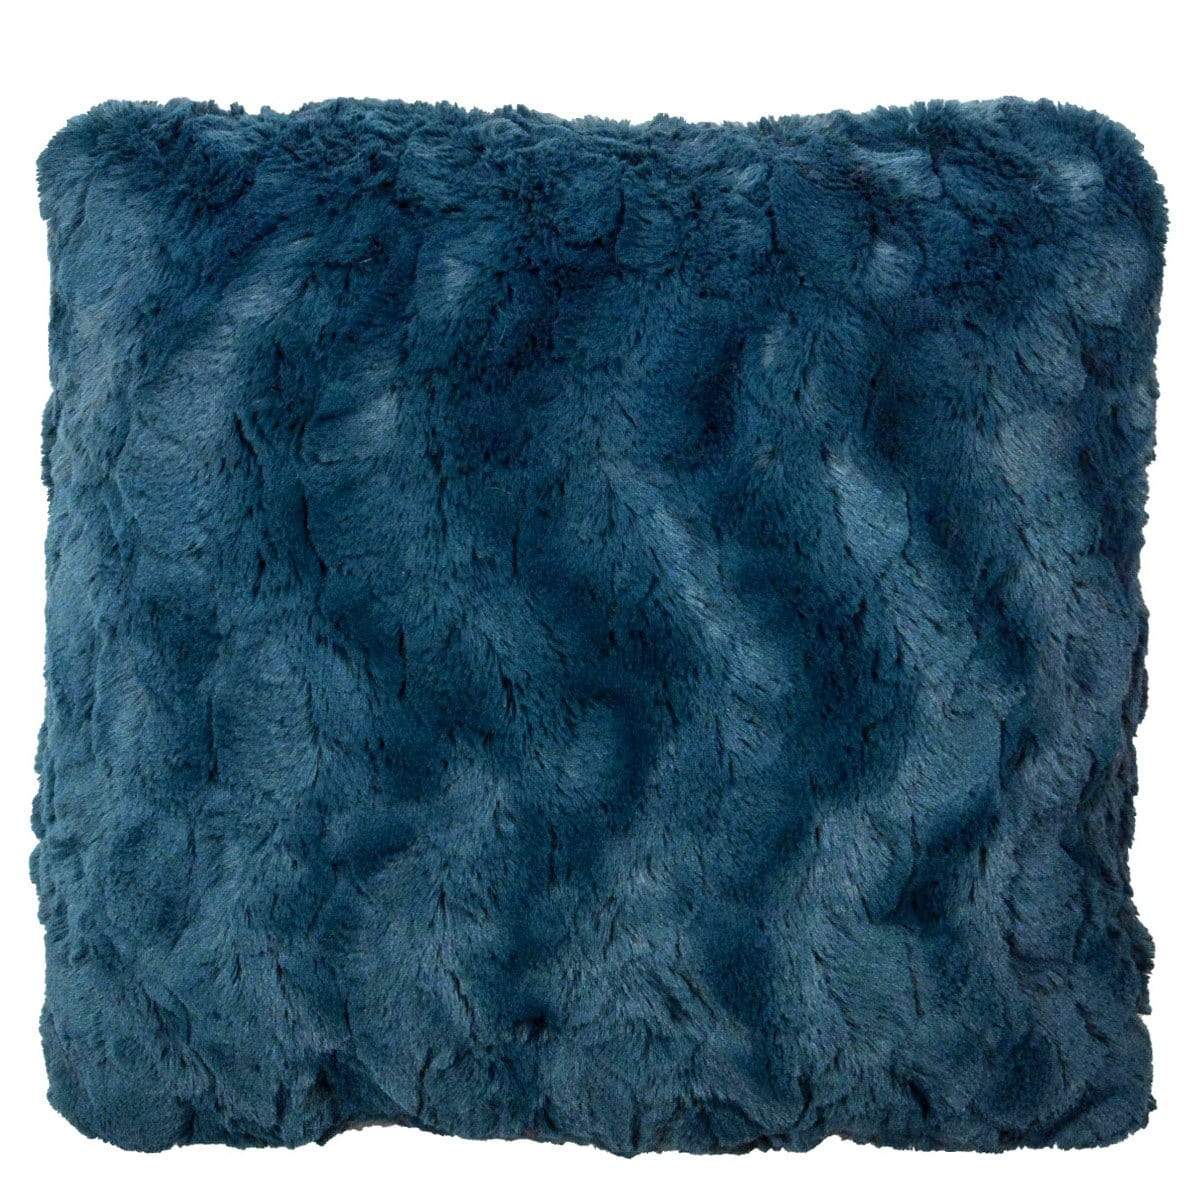 Pillow Sham - Luxury Faux Fur in Peacock Pond